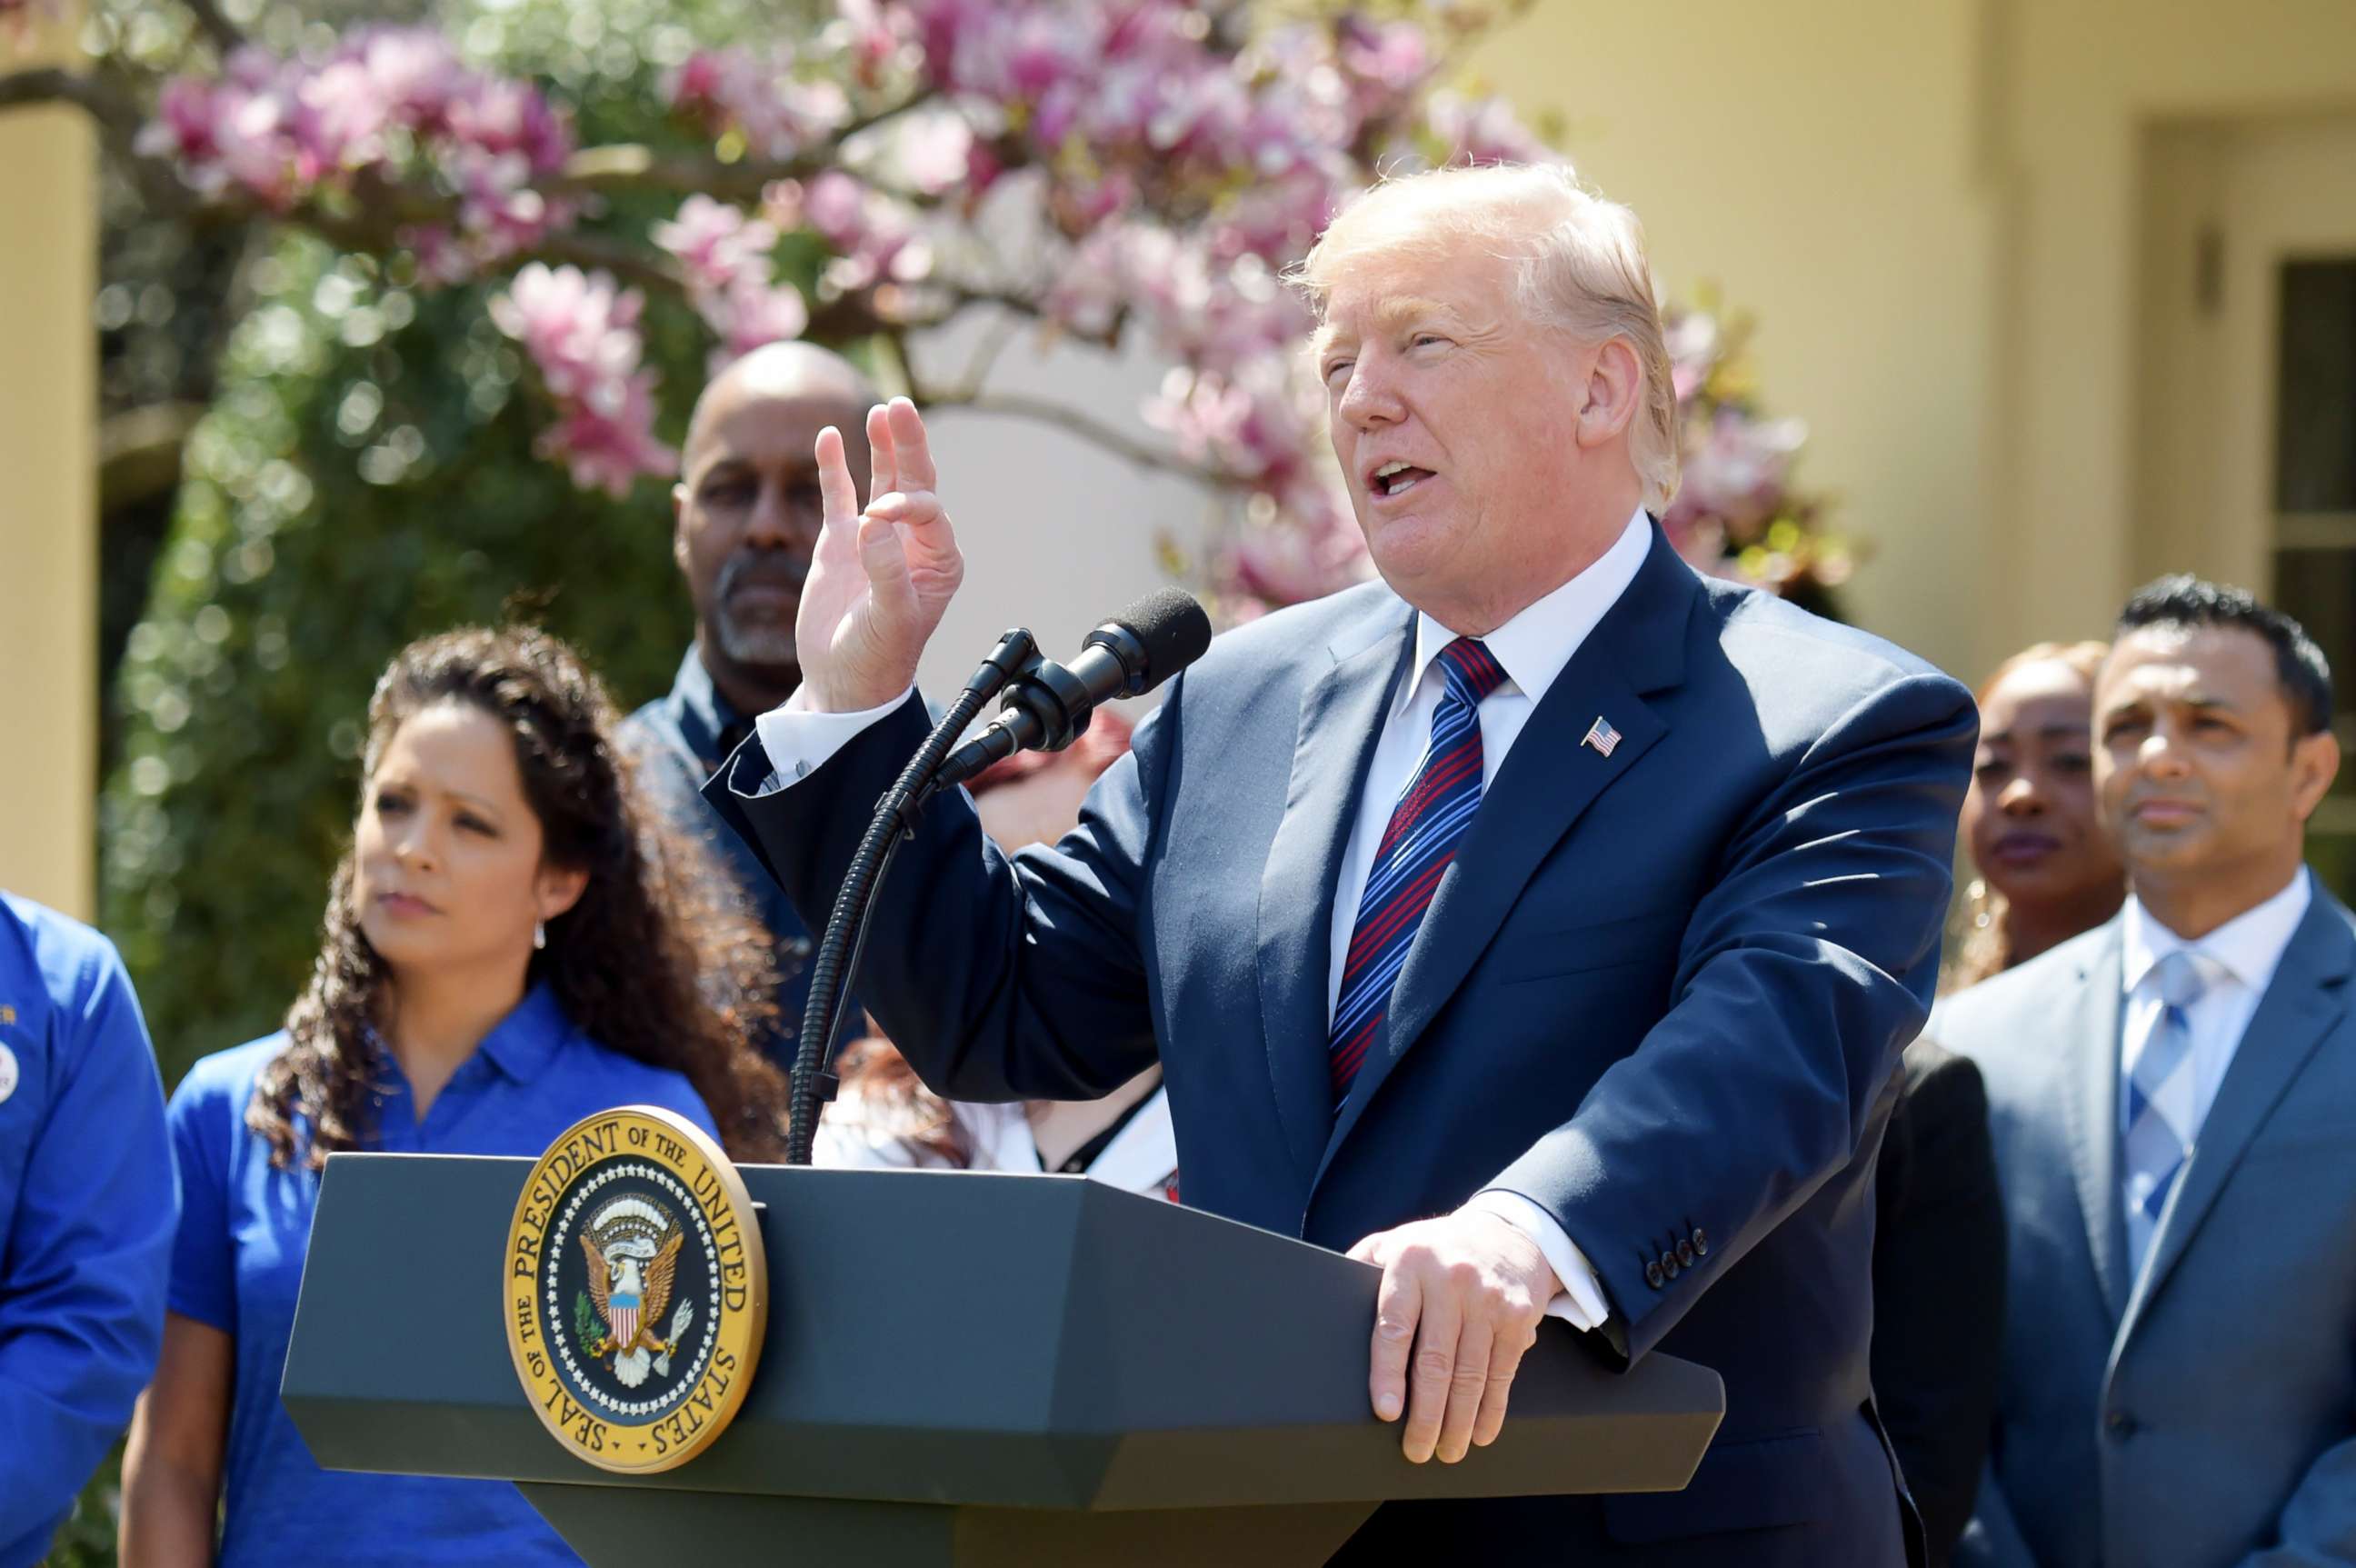 PHOTO: President Donald Trump delivers a speech at the White House on April 12, 2018.